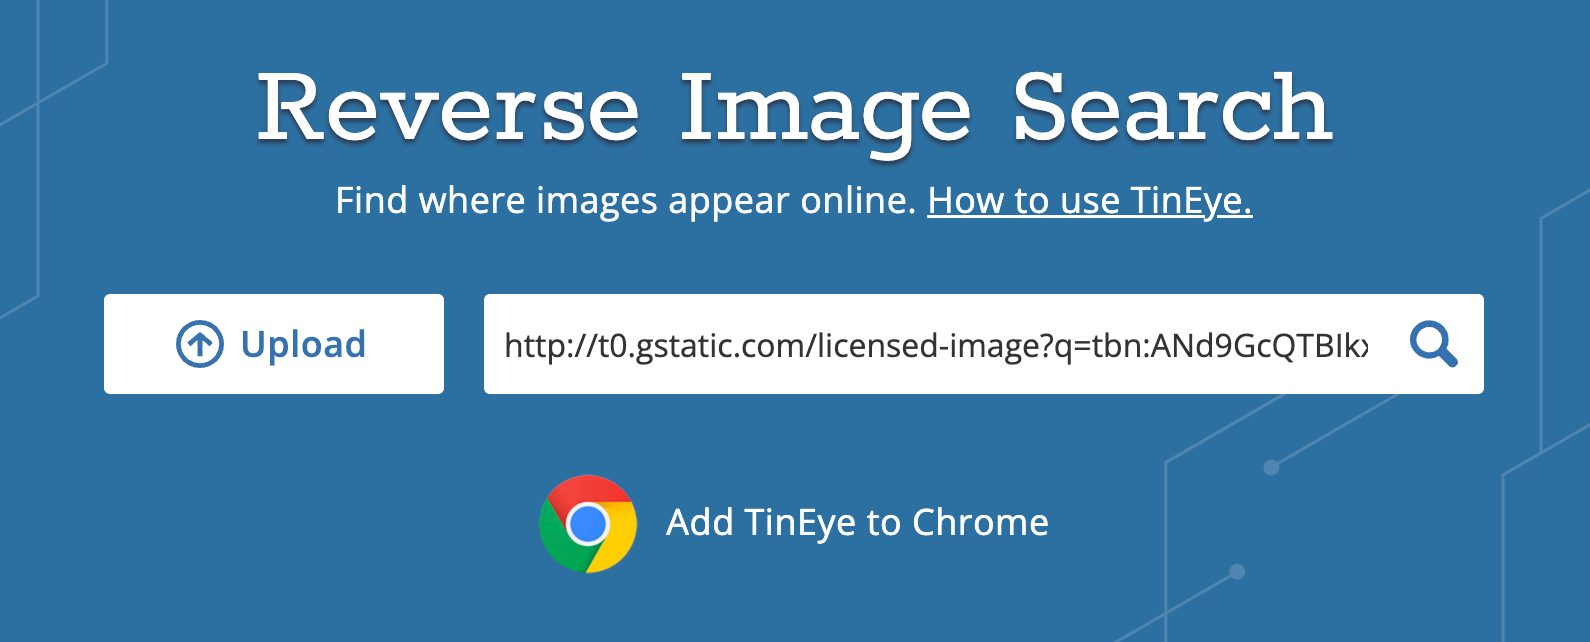 an image of Understanding Reverse Image Search